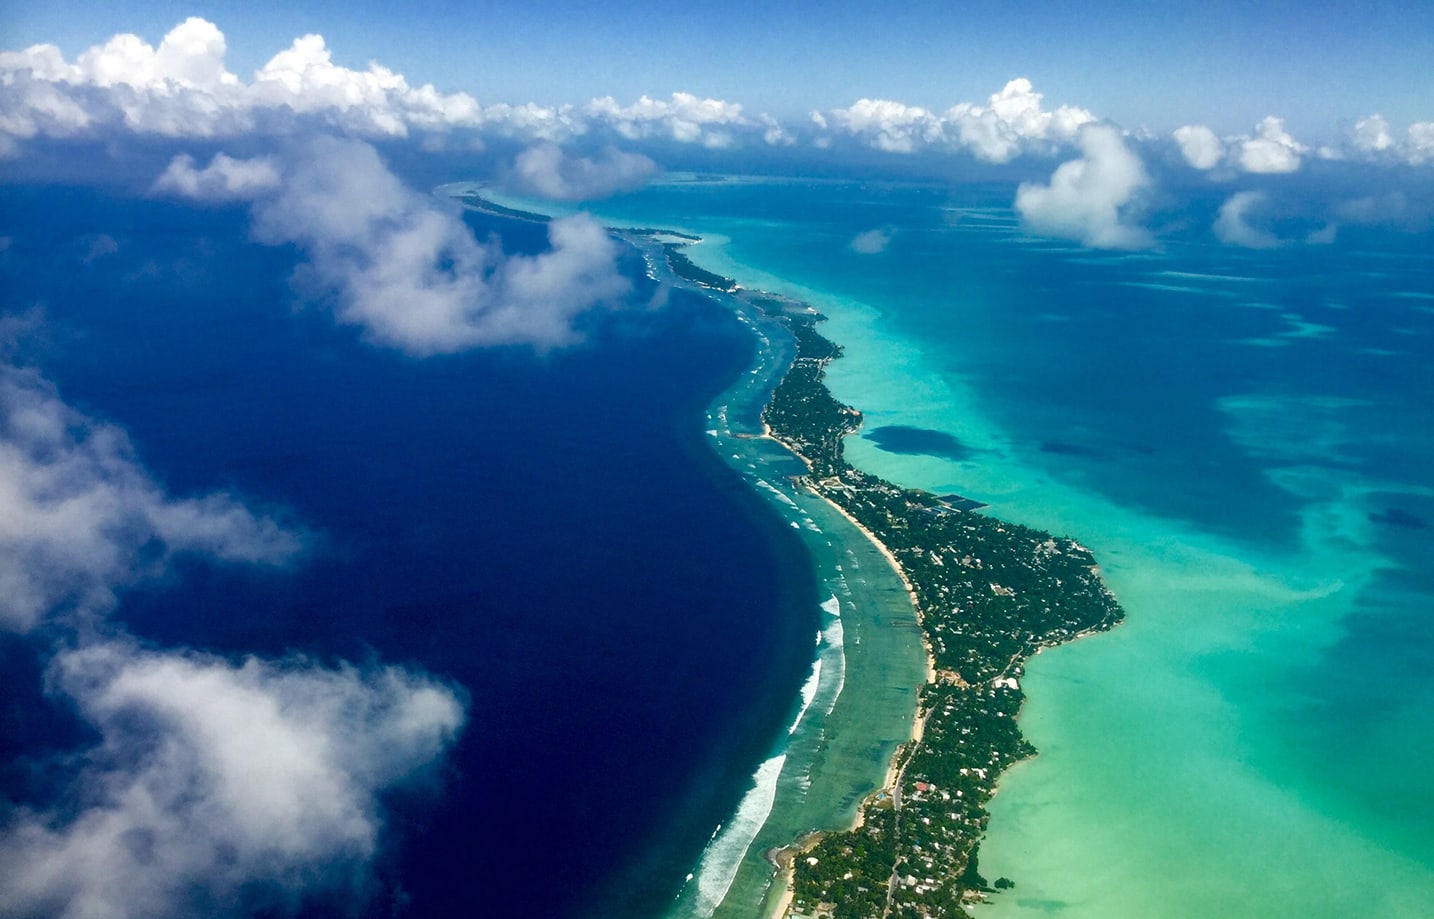 The Kiribati capital and most populated area, South Tarawa, consists of several islets, connected by a series of causeways.